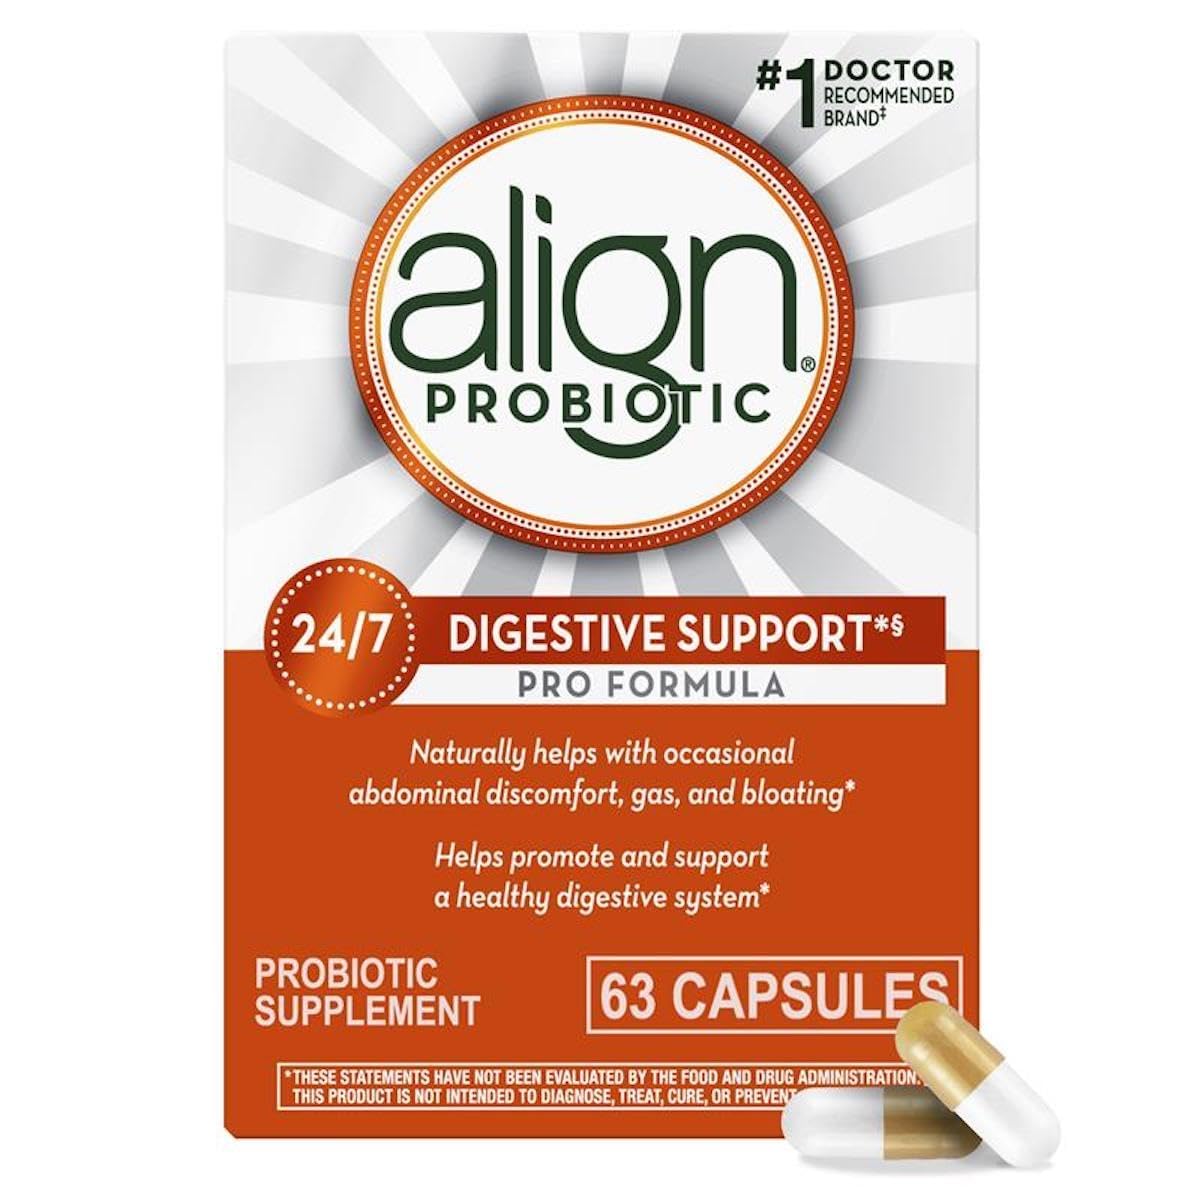 Align Probiotic, Pro Formula, Probiotics for Women and Men, Daily Probiotic Supplement for Digestive Health, Helps Soothe Occasional Abdominal Discomfort, Gas, and Bloating 63 Capsules